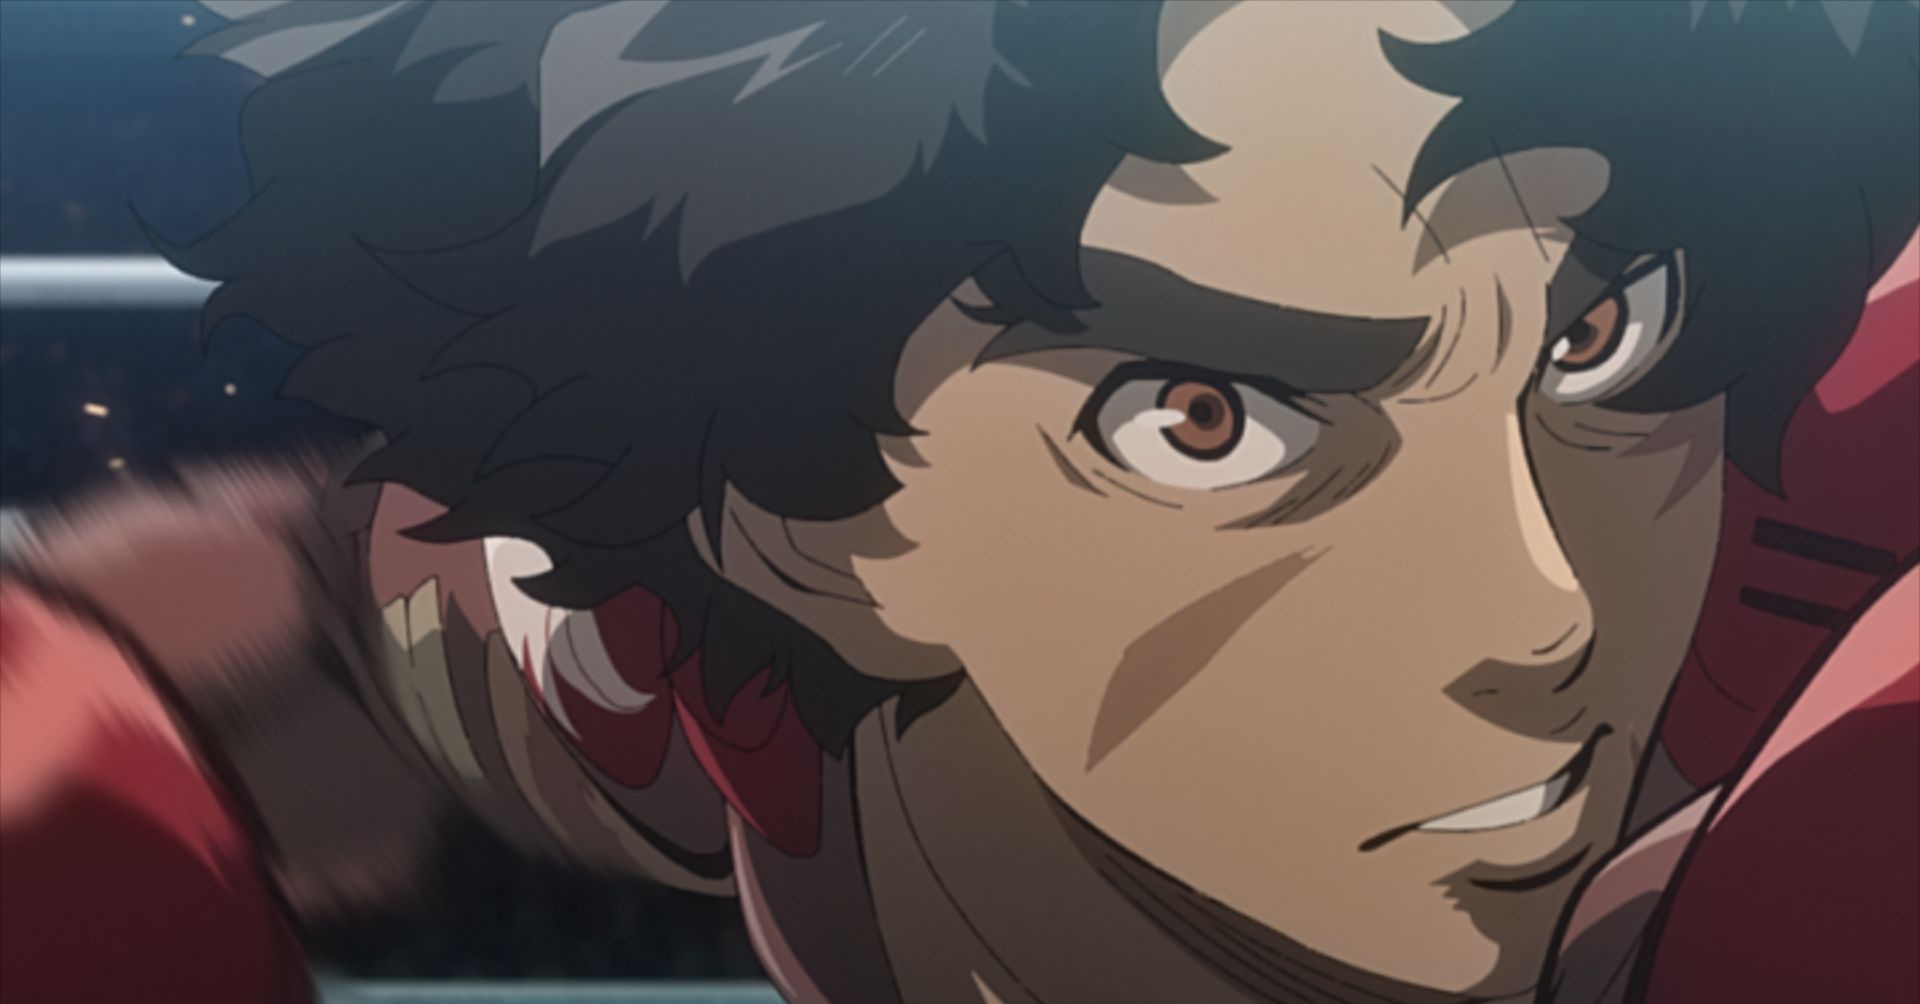 Joe throwing out a punch in Megalo Box 2